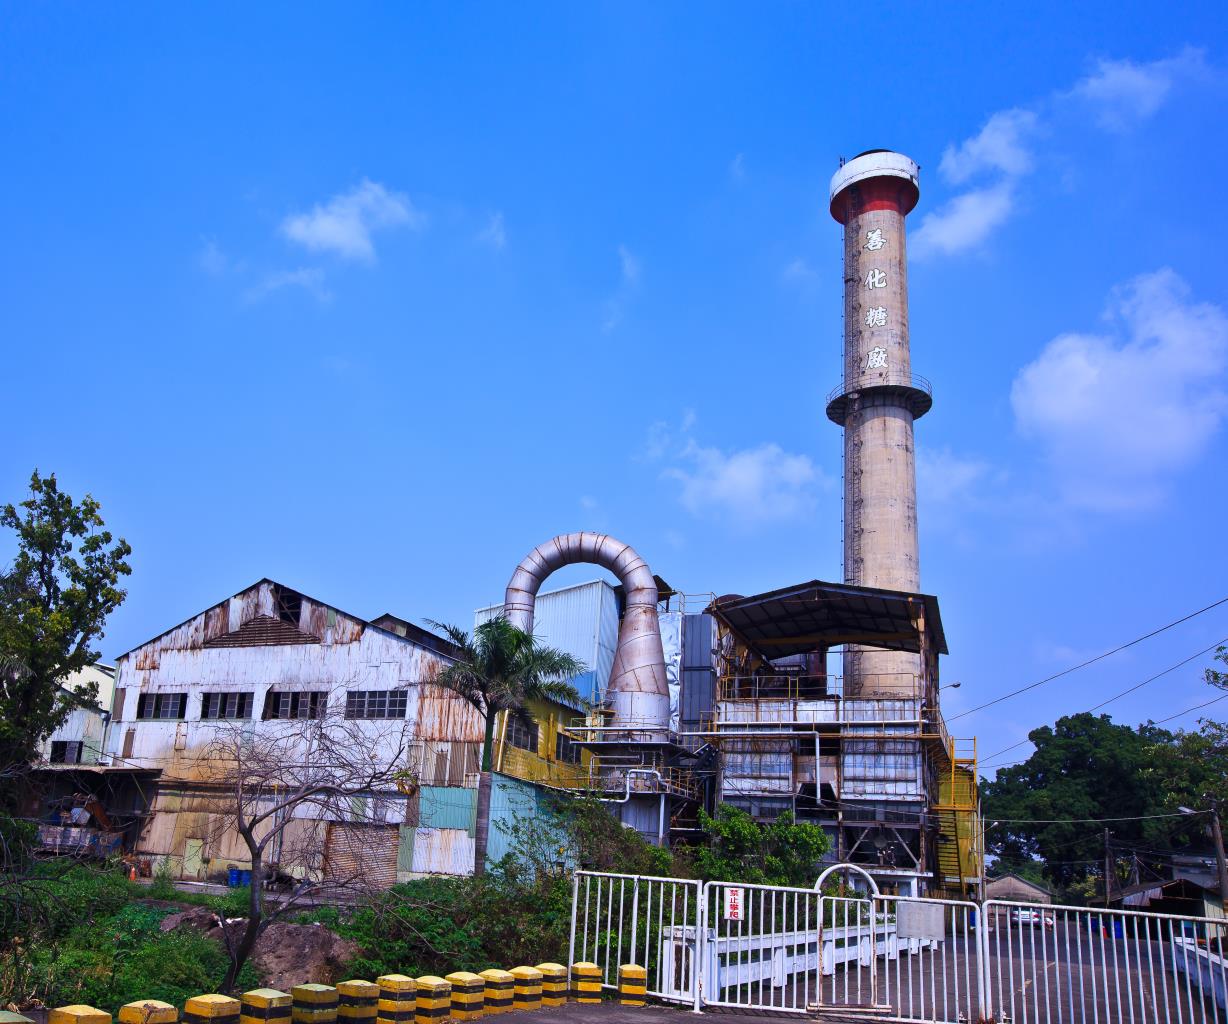 Shanhua factory is 117 years and it is one of the only two operating sugar mills in Taiwan